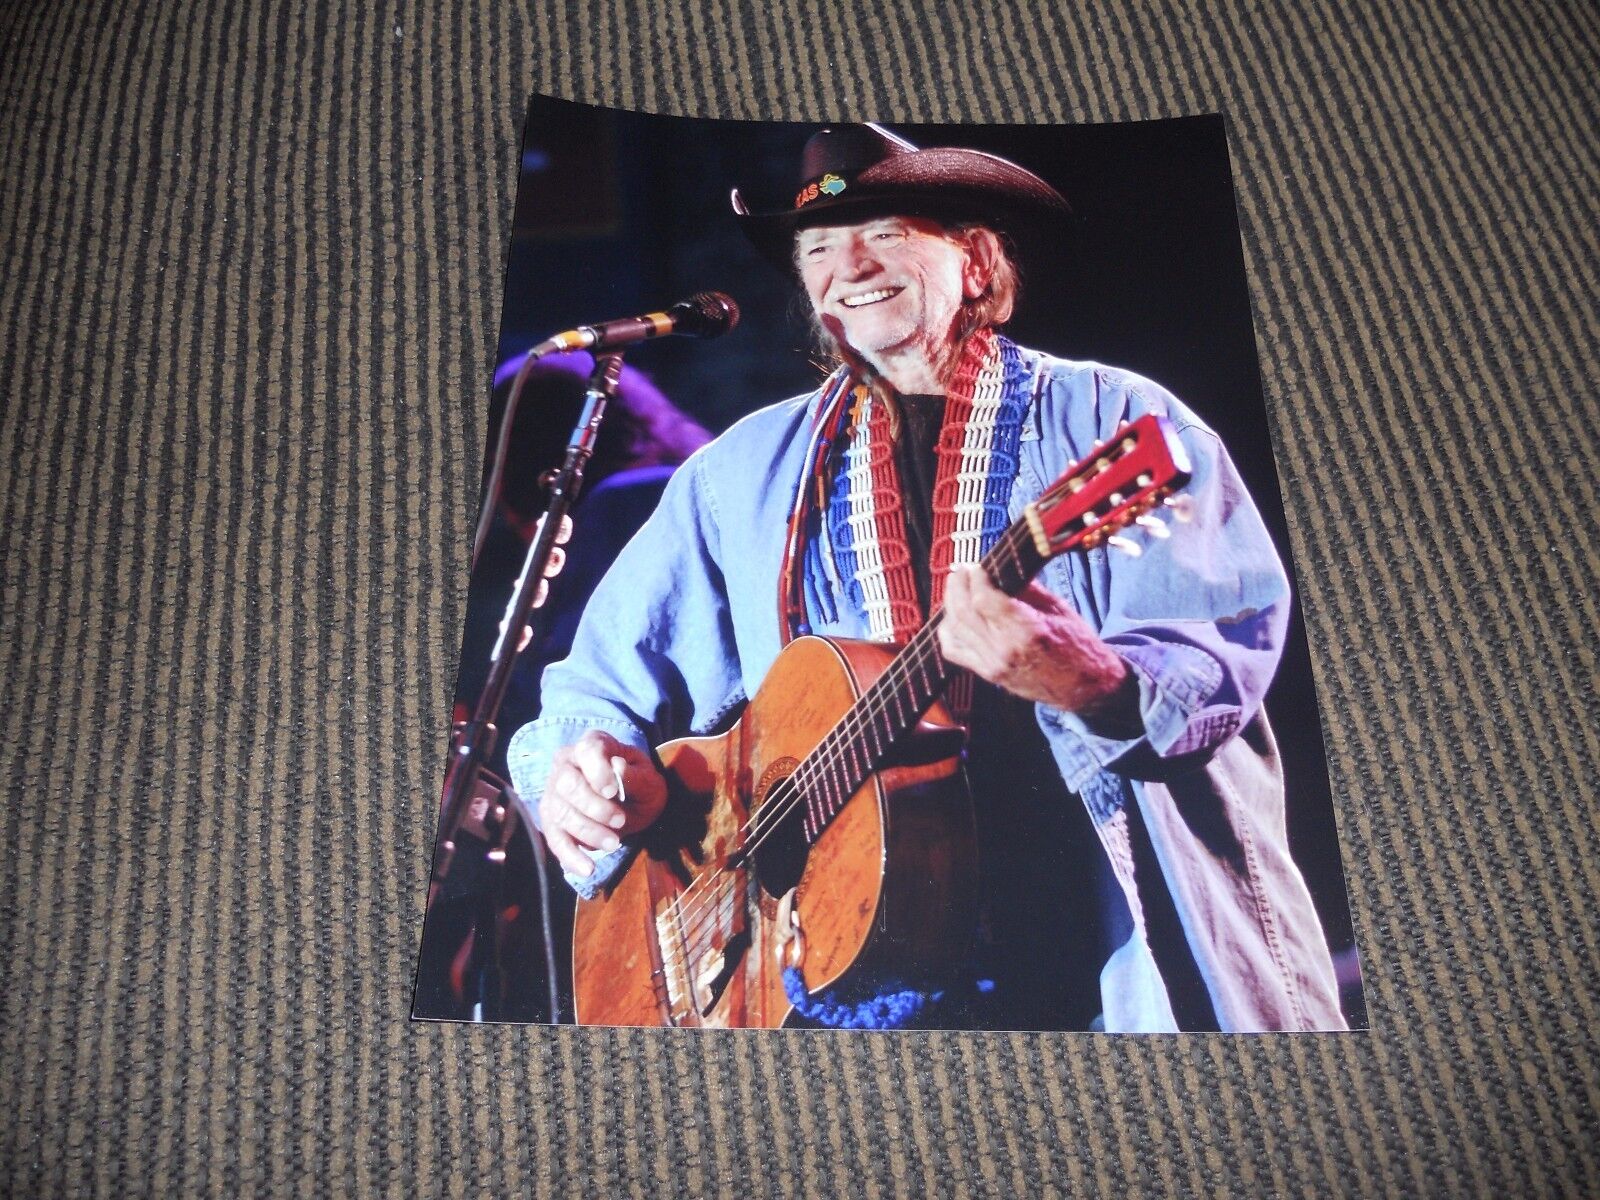 Willie Nelson Live Concert Country Music Legend 8 x 10 Color Photo Poster painting #5